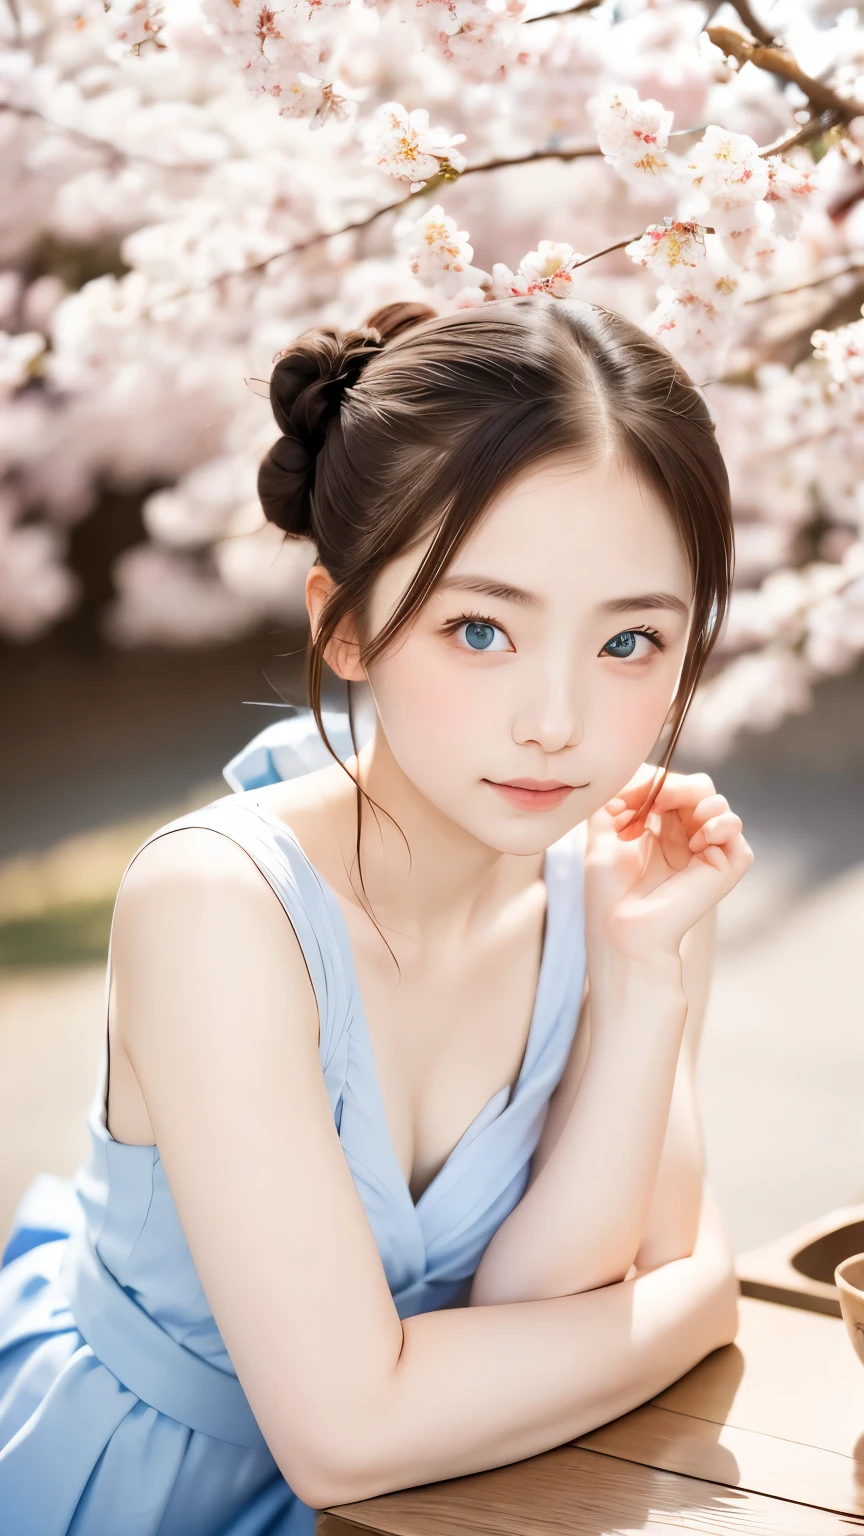 table top:1.2, high quality, 最high quality, High resolution, be familiar with, surreal, with a girl, bun hair, blue eyes,Infinitely clear eyes、head tilt, sunset, Cherry Blossom, portrait,natural look, (be familiar with face), ((sharp focus)), ((face)), Upper body_body